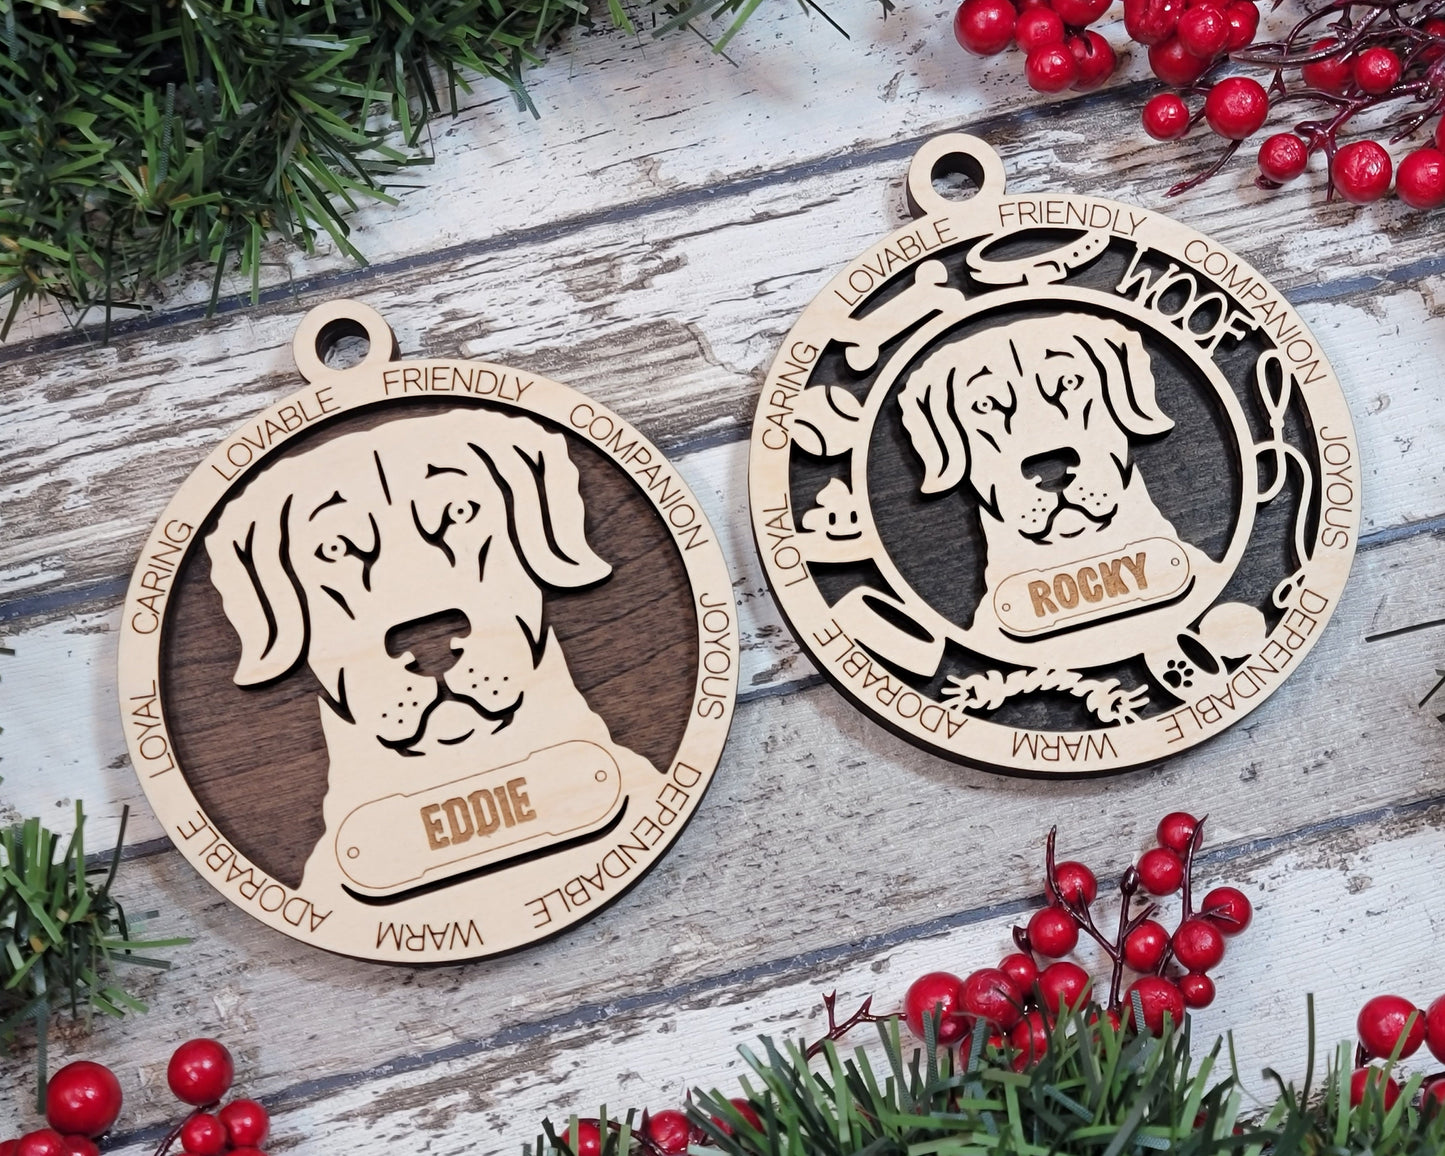 Chesapeake Bay Retriever - Adorable Dog Ornaments - 2 Ornaments included - SVG, PDF, AI File Download - Sized for Glowforge